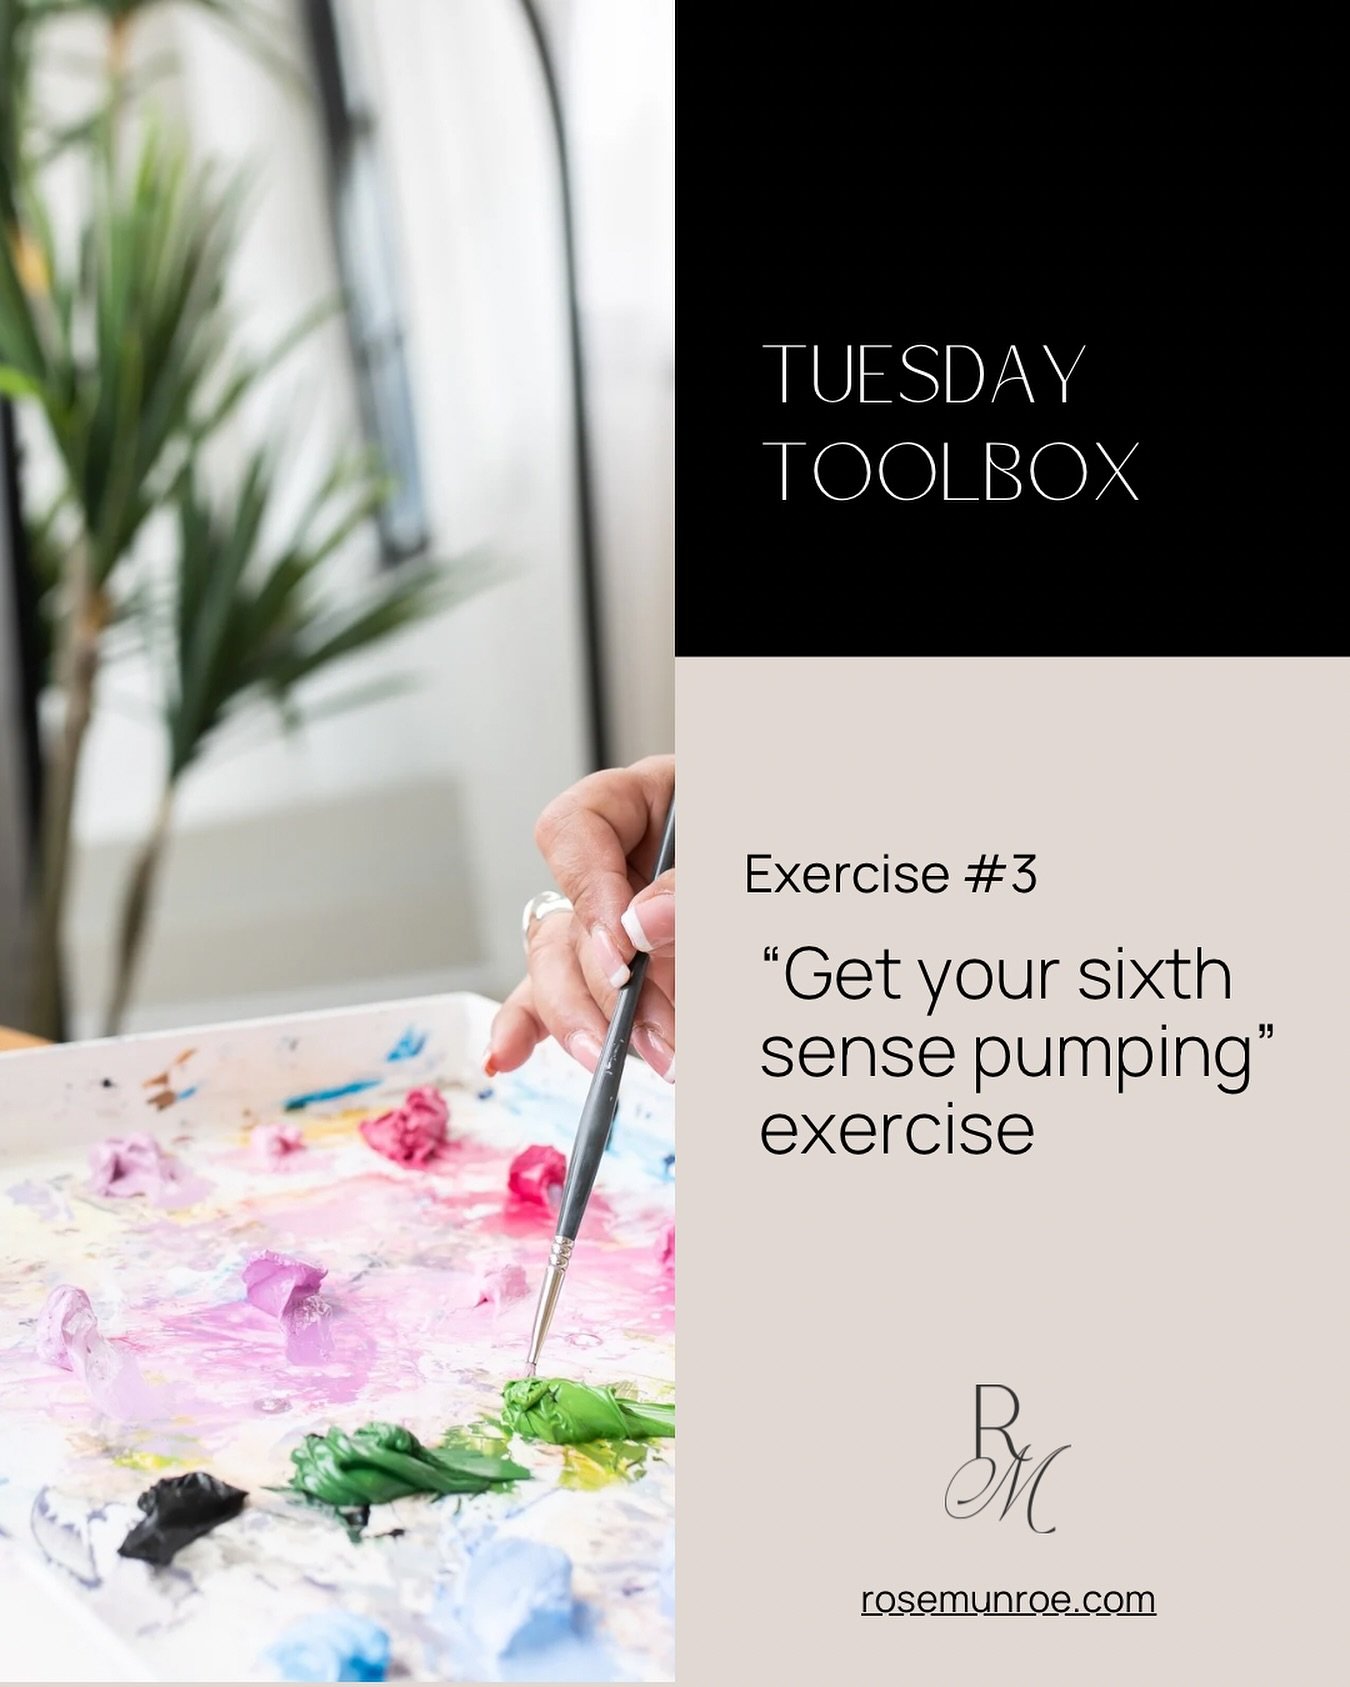 🛠️&nbsp;**Tuesday Toolbox**&nbsp;🛠️

Welcome to my Tuesday Toolbox! 🧰

Introducing tool #3- &ldquo;Get your sixth sense pumping&rdquo; 💕

This exercise is perfect for more left-brained (logical thinkers) individuals interested in tapping into the